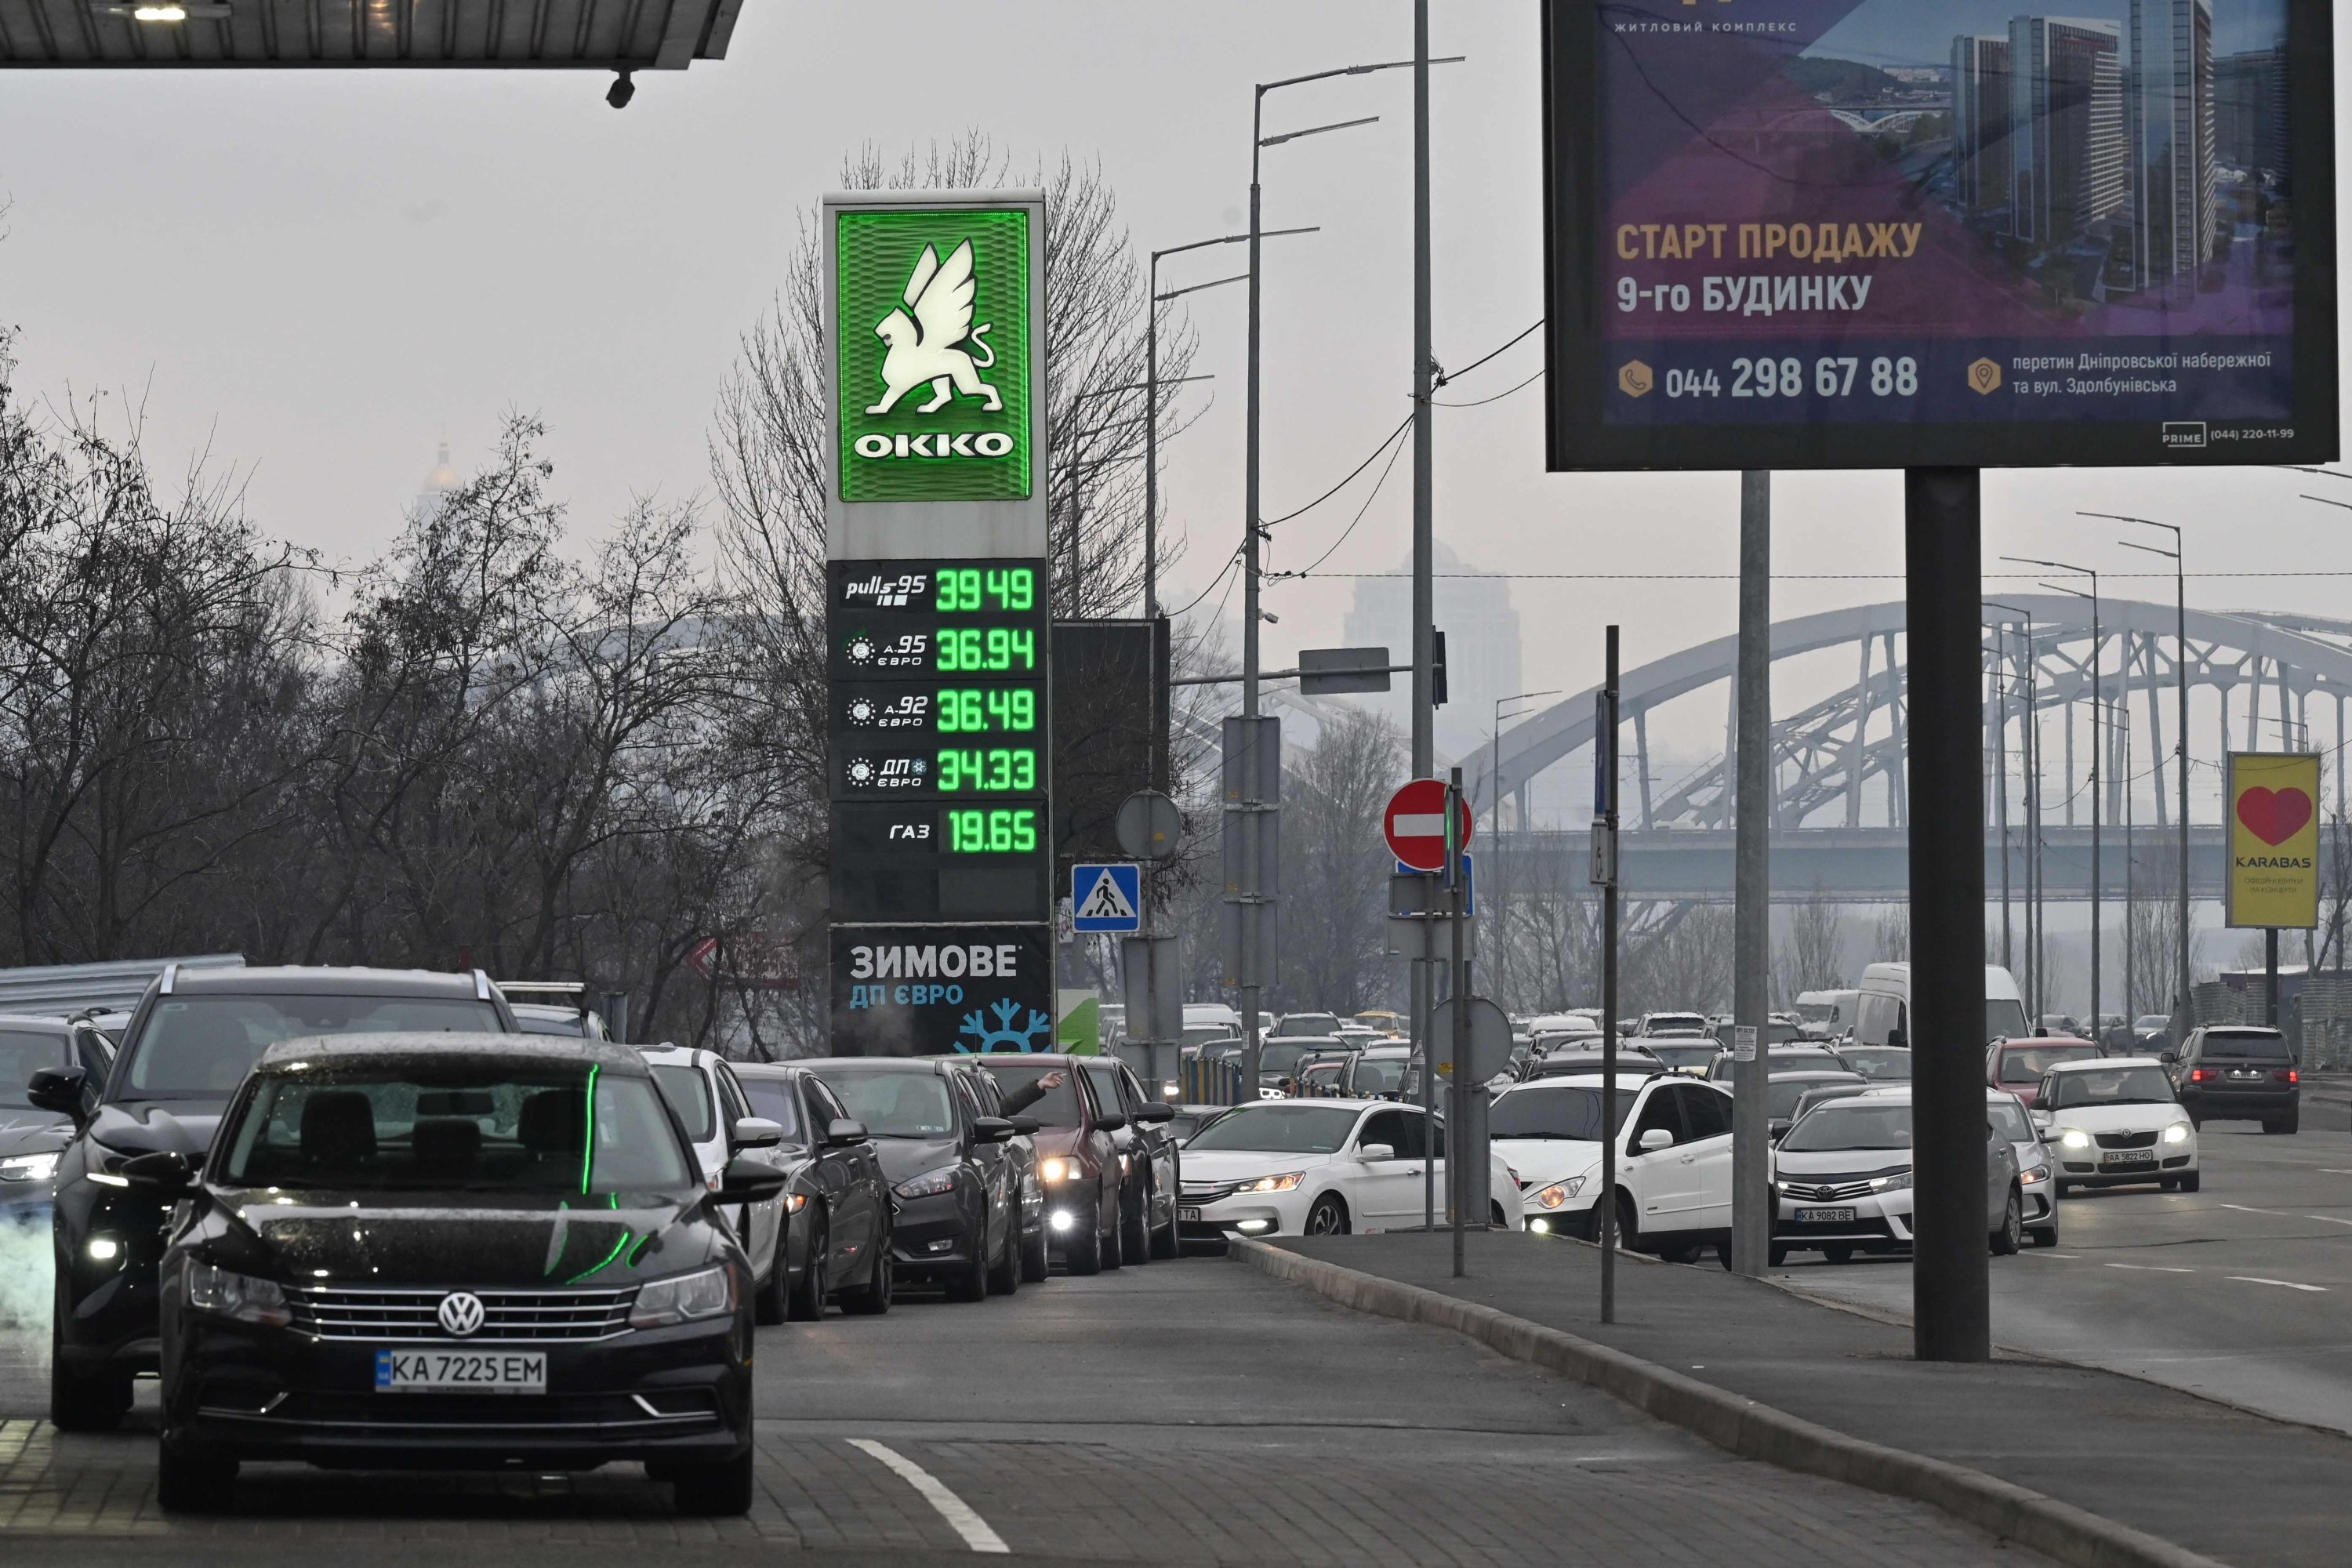 People queue at a petrol station in Kyiv, Ukraine, Feb. 24, 2022. (AFP Photo)